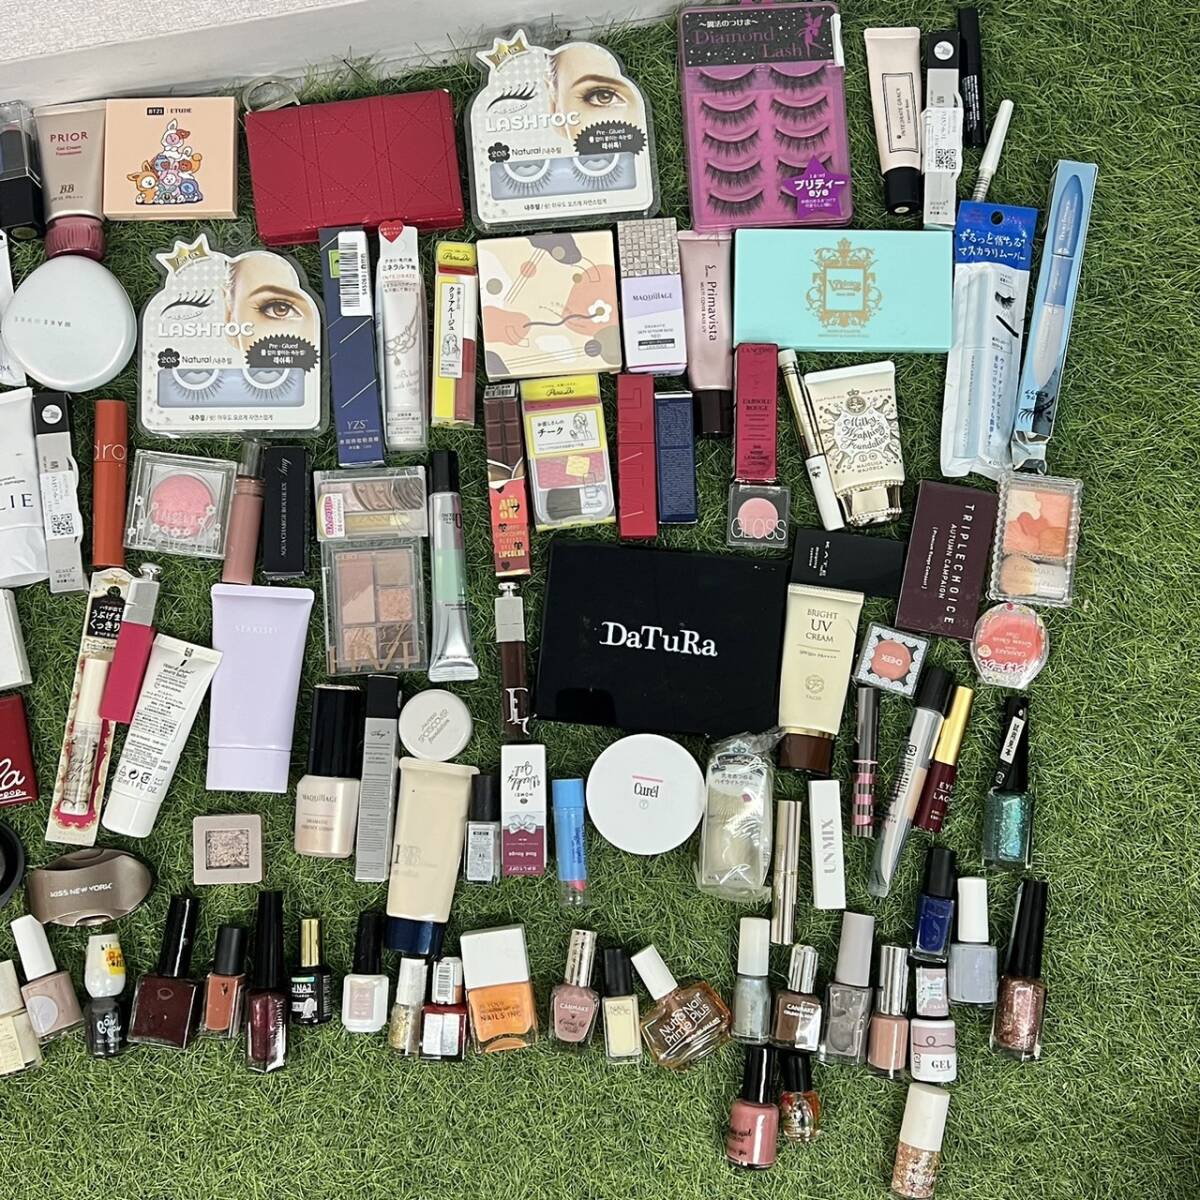  new goods unused goods equipped DIOR DaTuRa NAILS INC GRACY etc. cosmetics cosme 100 point and more large amount summarize foundation lipstick eyeshadow 